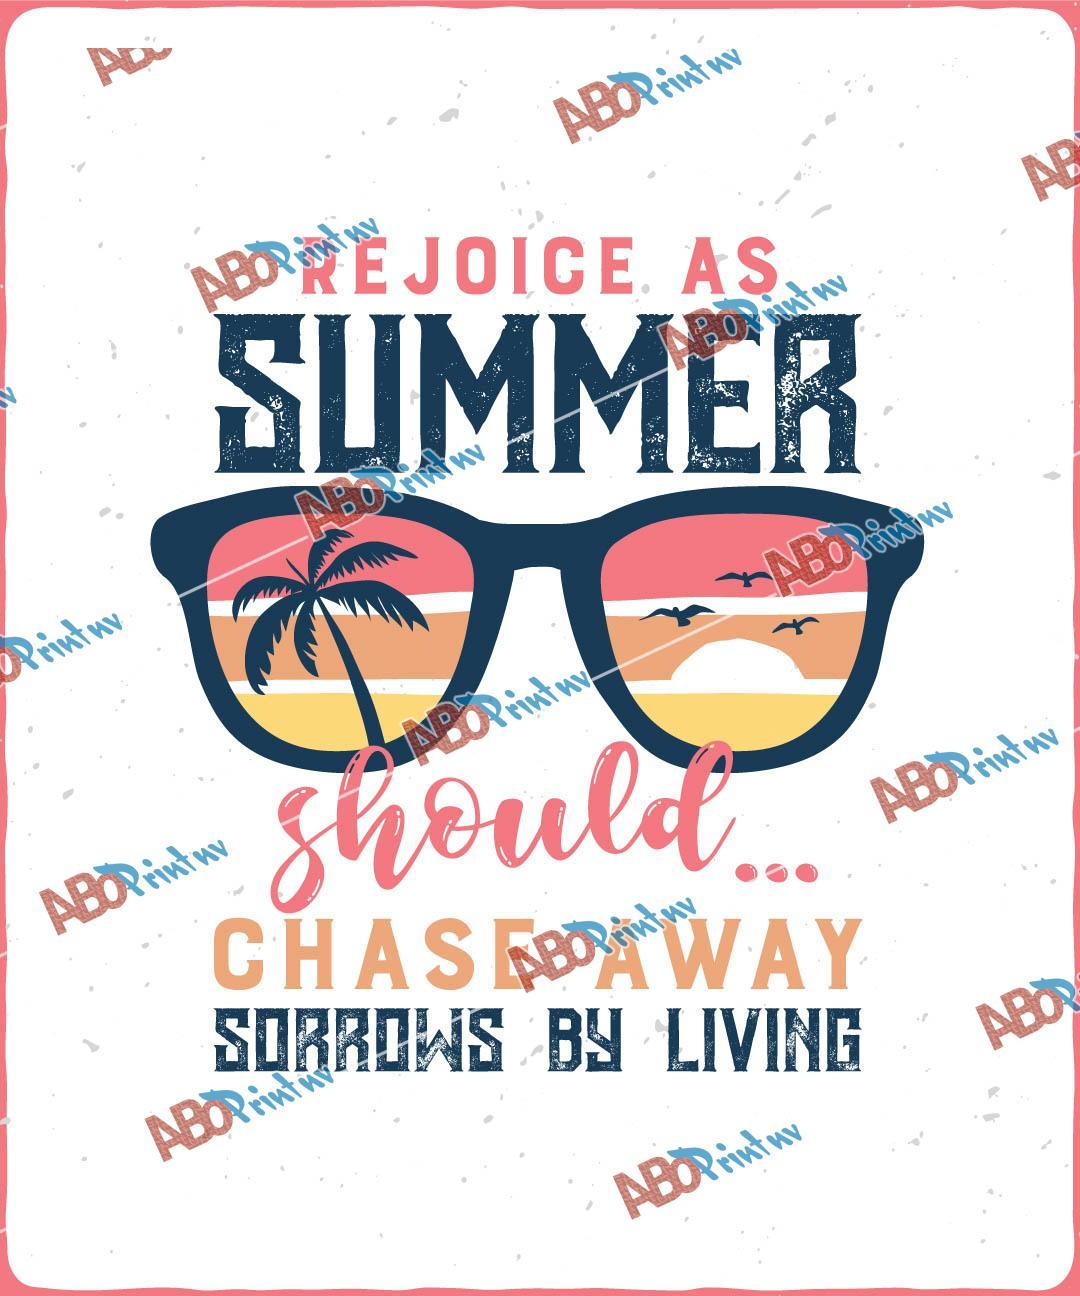 Rejoice as summer should...chase away sorrows by living.jpg